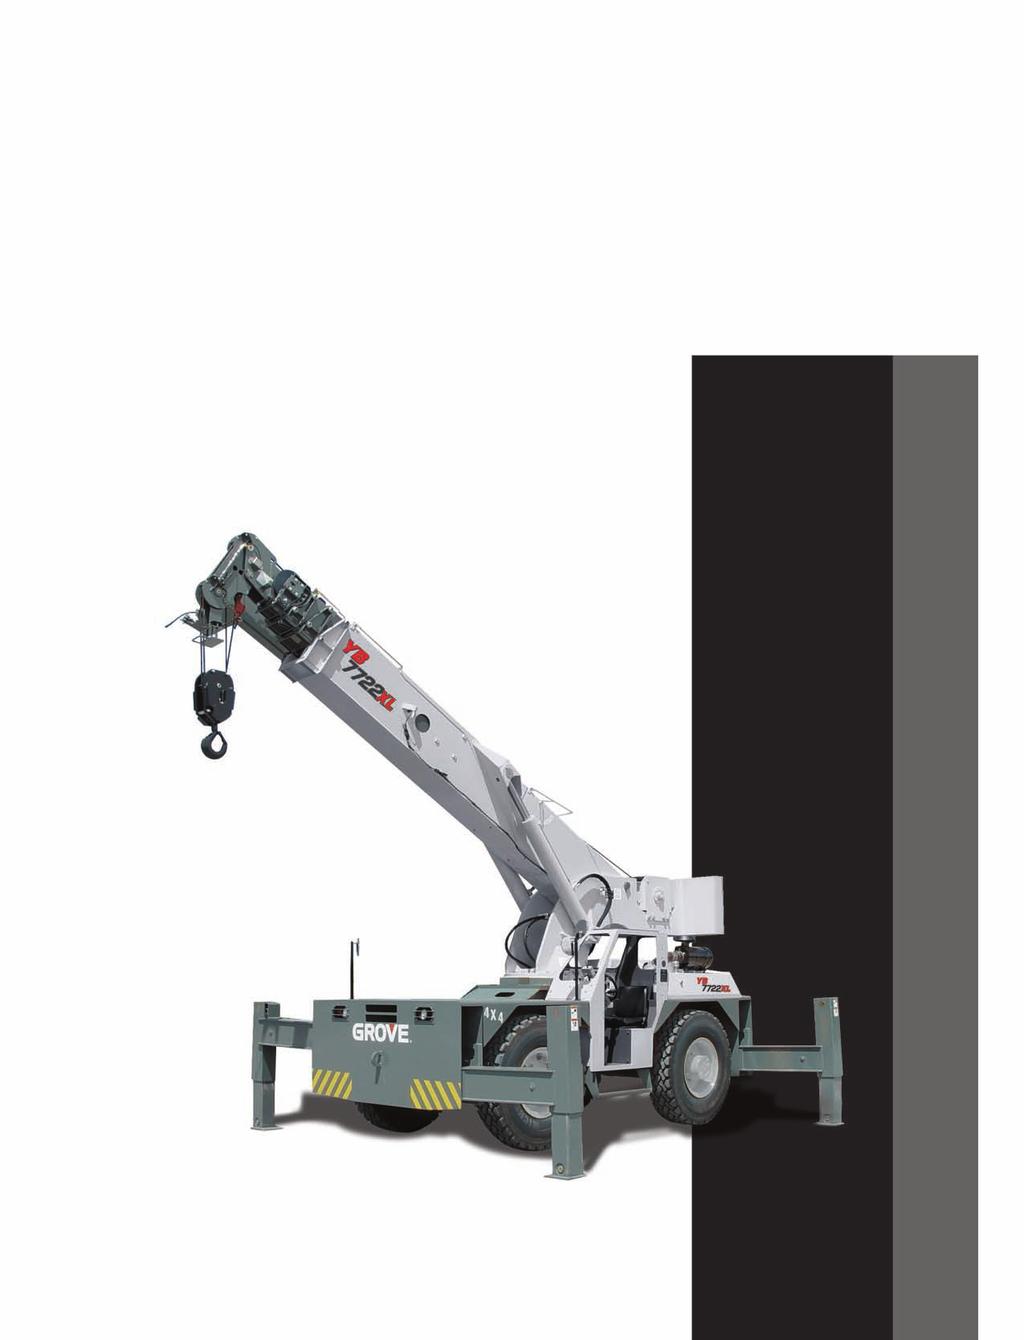 product guide features 2 models YB7722 & YB7722XL 22 ton (19.9 mt) capacity 36 on outriggers @ 8.5 ft. (2.6m) radius 15 ton (13.6 mt) deck carrying capacity 15 ton (13.